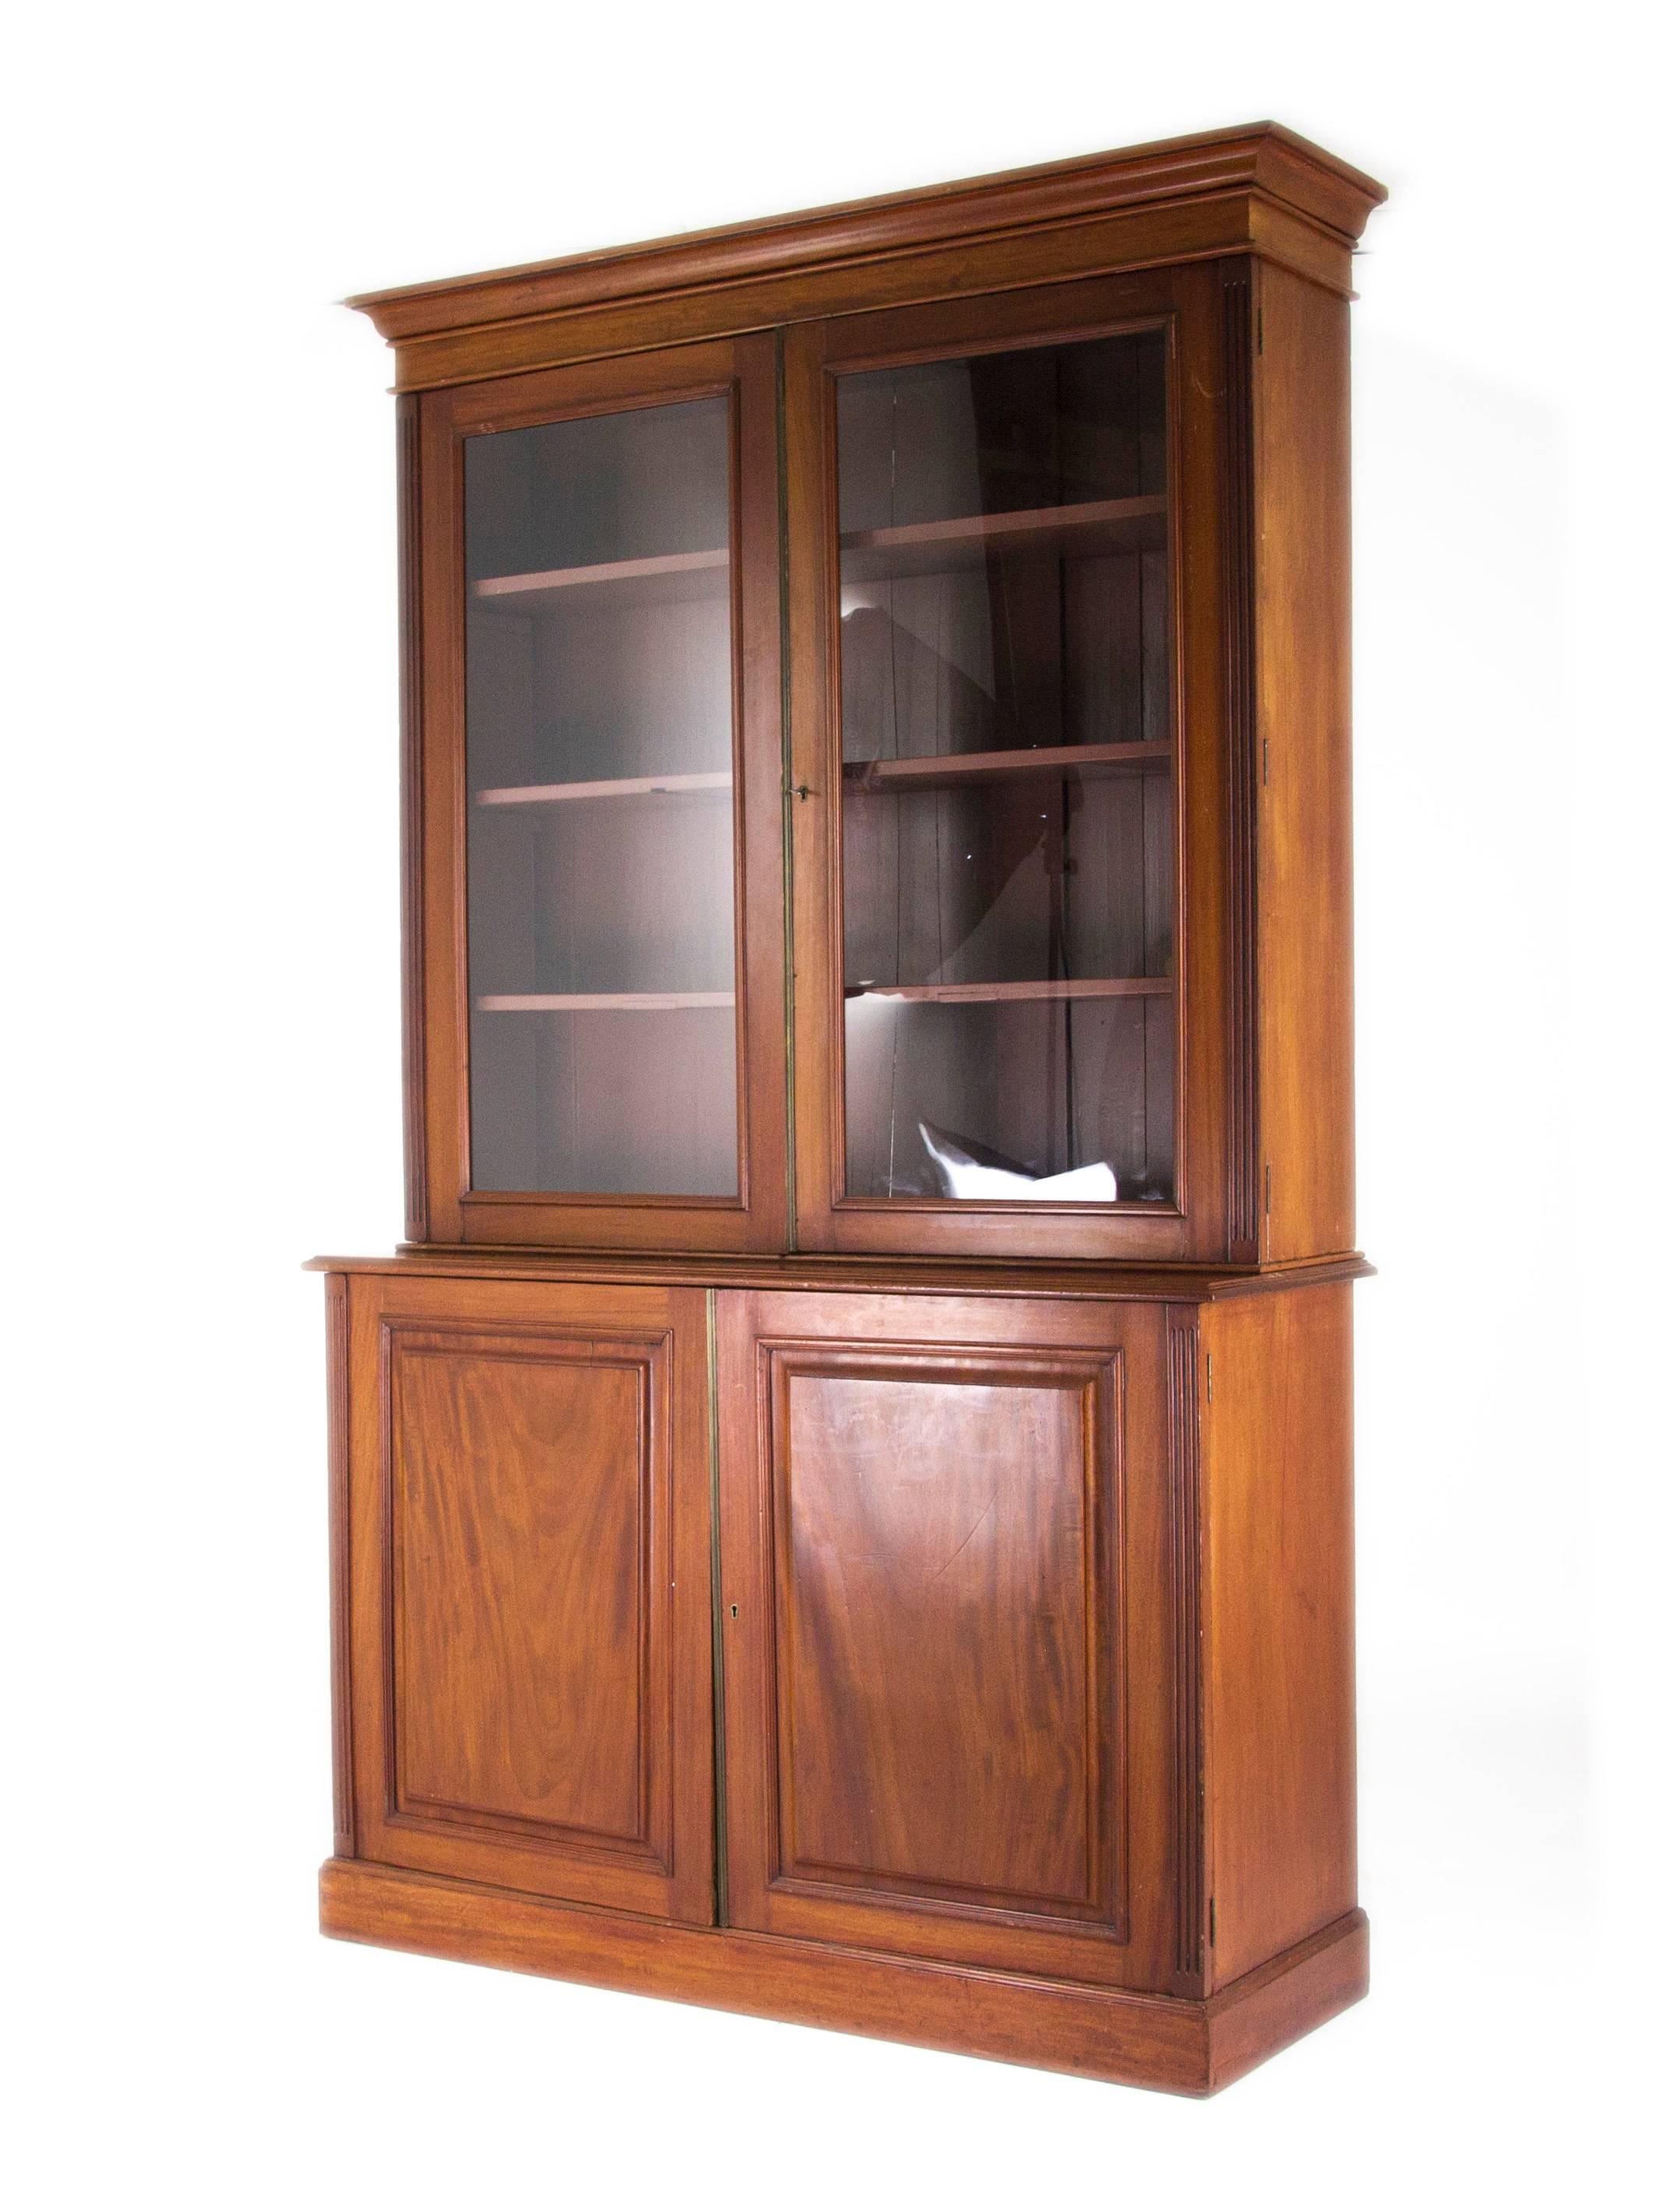 Scotland, 1870
Solid Walnut Construction
Original Finish
Flared Cornice Above
Two Glass Doors Below
Fitted with three Fixed Shelves and their dovetailed drawers
Two Paneled Doors Below with Single Fixed Shelf and Two Dovetailed Drawers
Ending on a